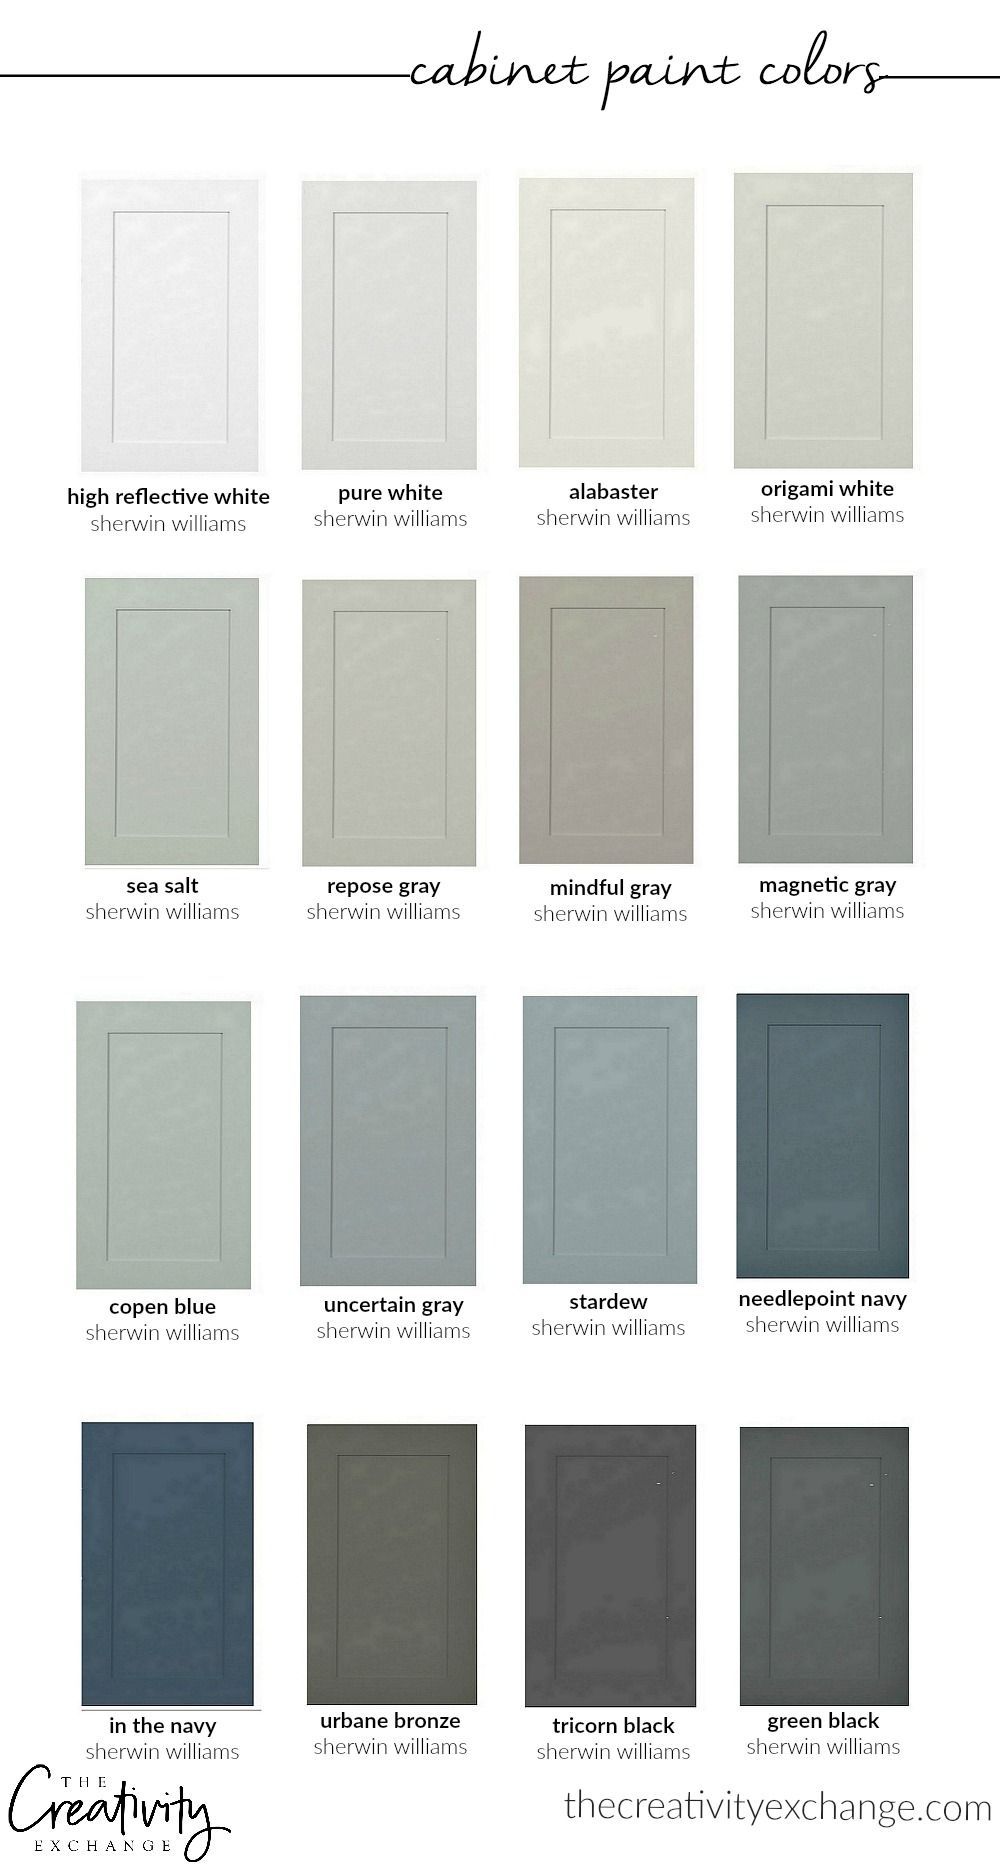 30 Beautiful Cabinet Paint Colors for Kitchens and Baths -   14 room decor Green cabinet colors ideas